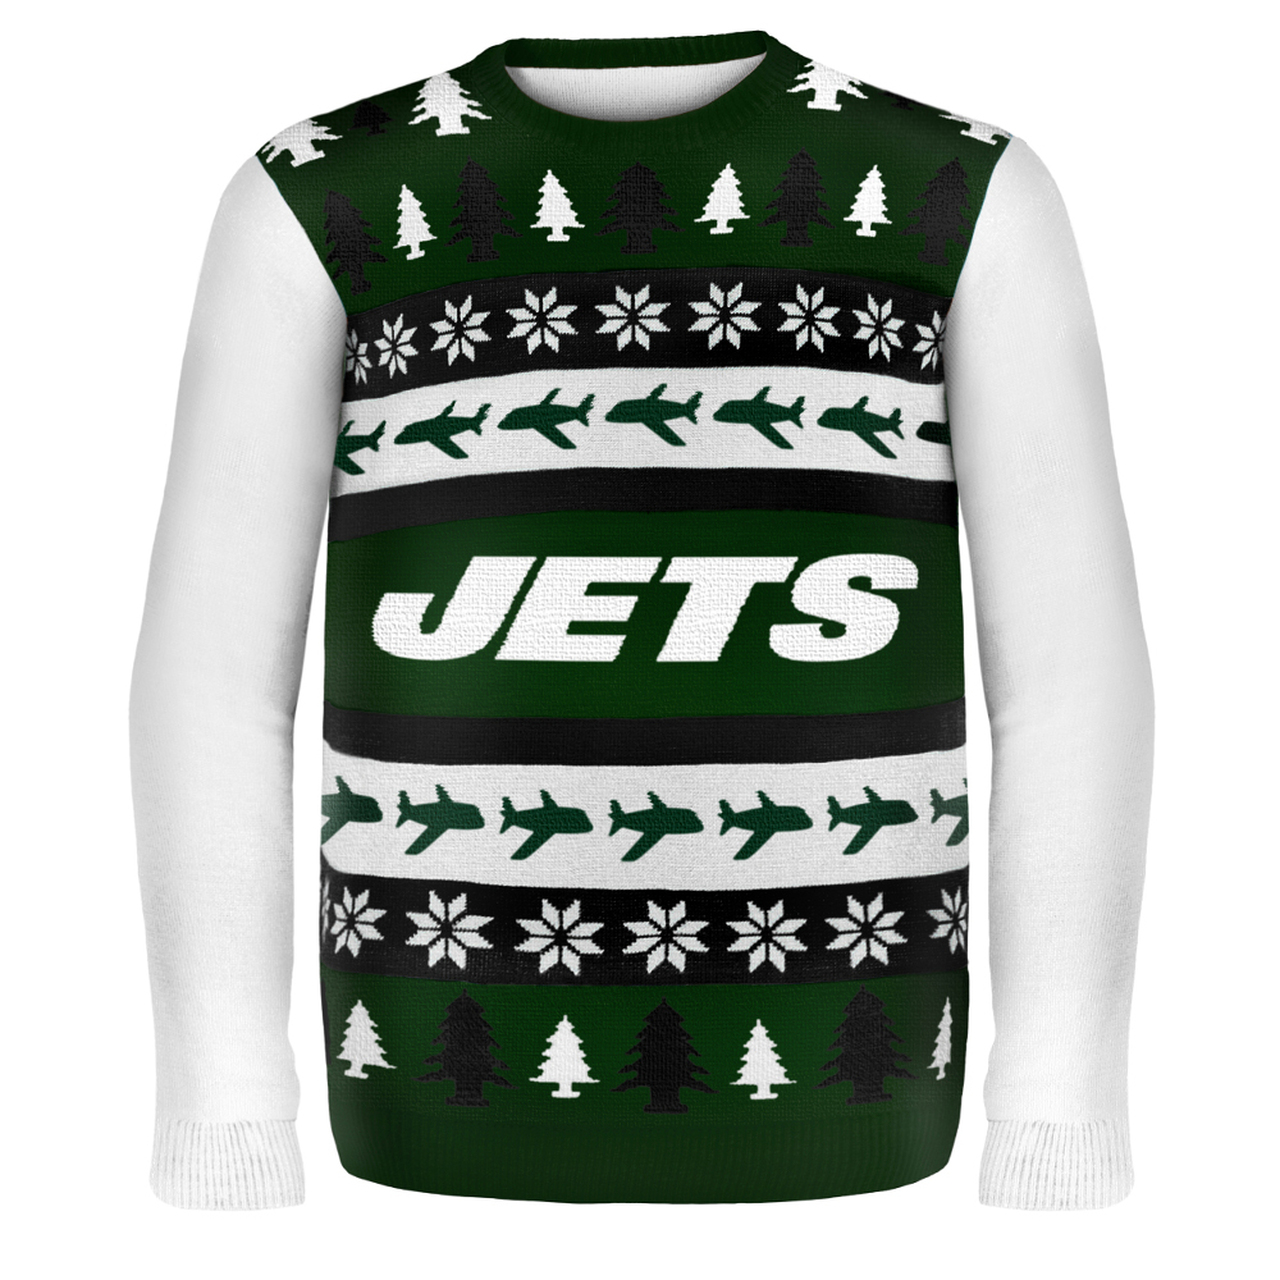 [ AWESOME ] New York Jets NFL Ugly Sweater – Saleoff 081221